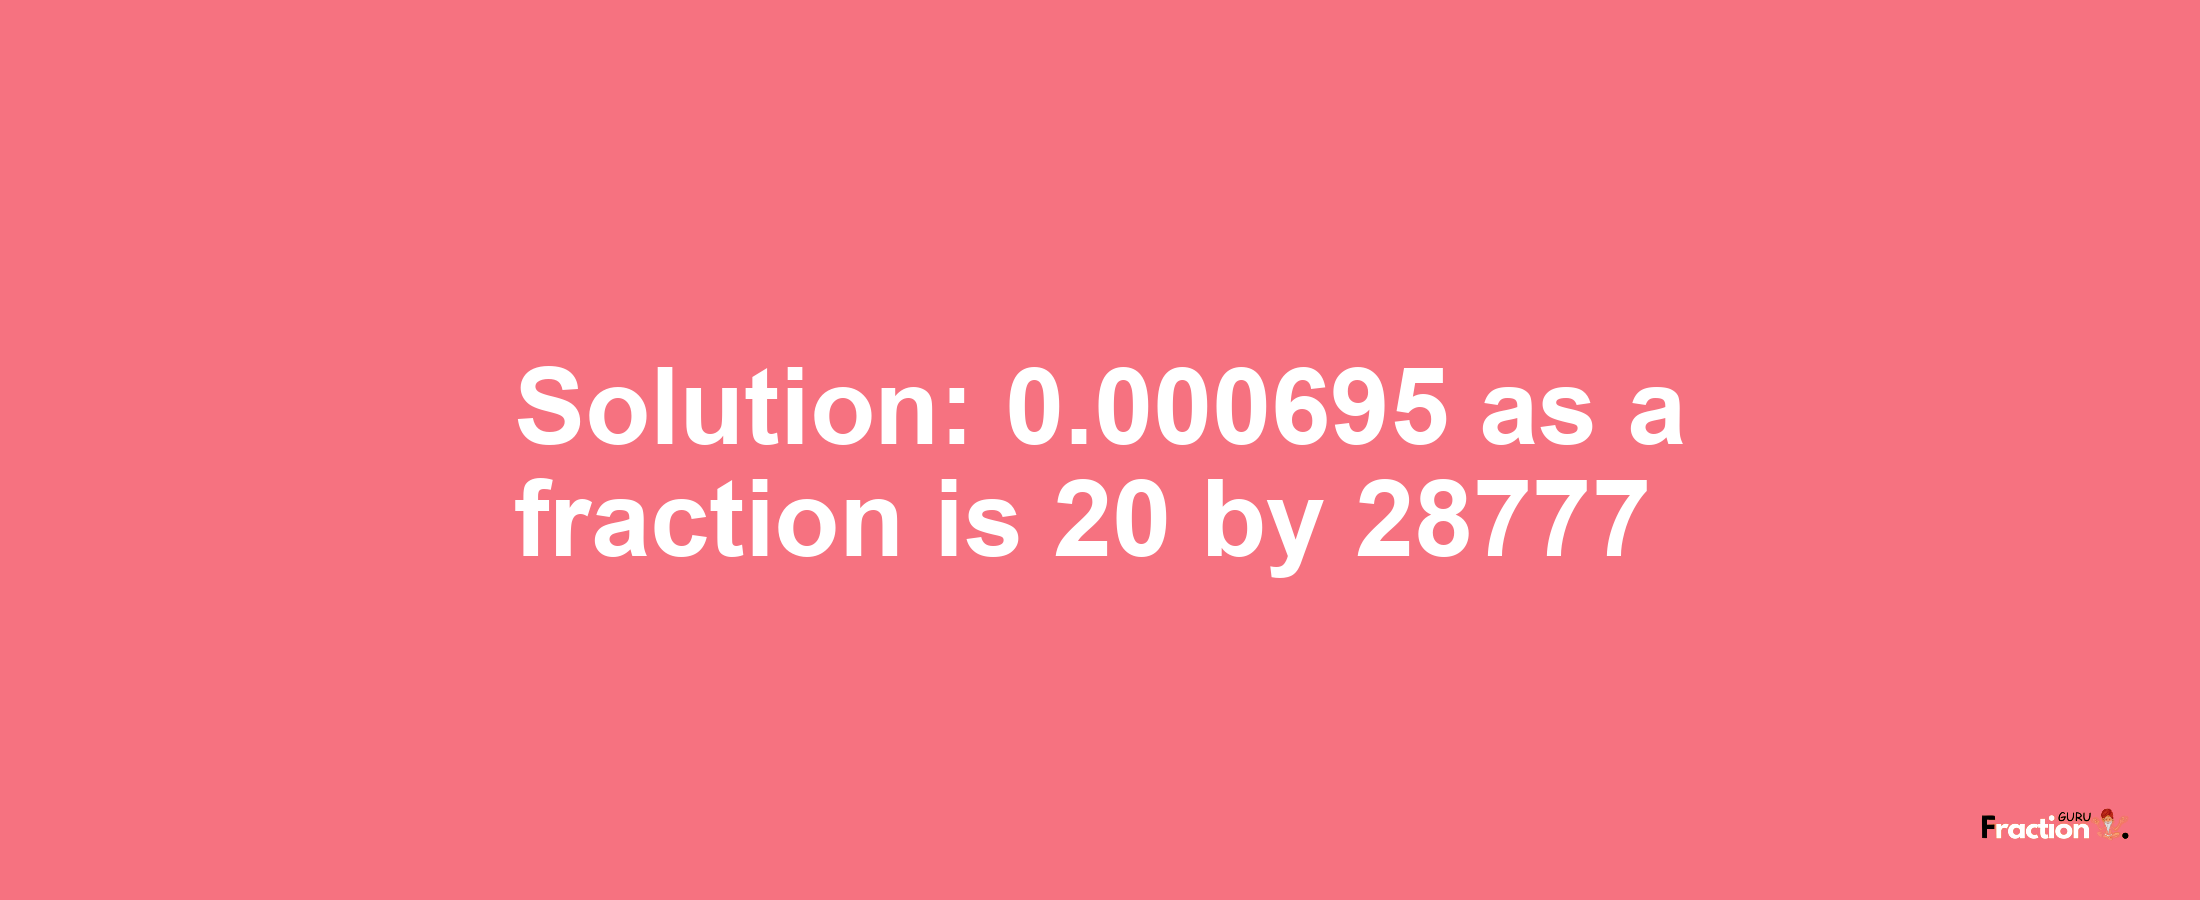 Solution:0.000695 as a fraction is 20/28777